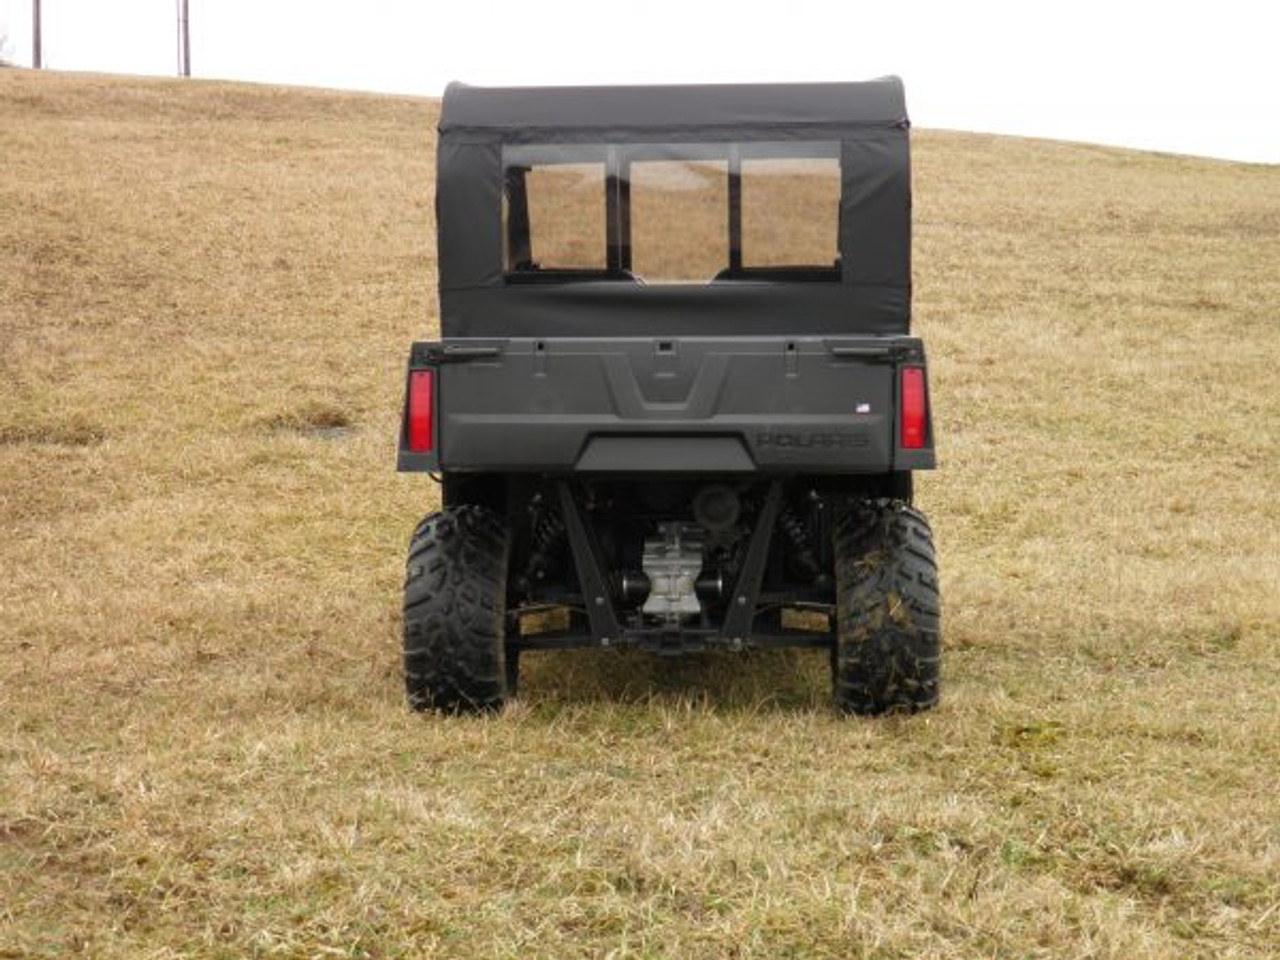 3 Star side x side Polaris Ranger Crew 570-4 full cab enclosure with vinyl windshield rear view